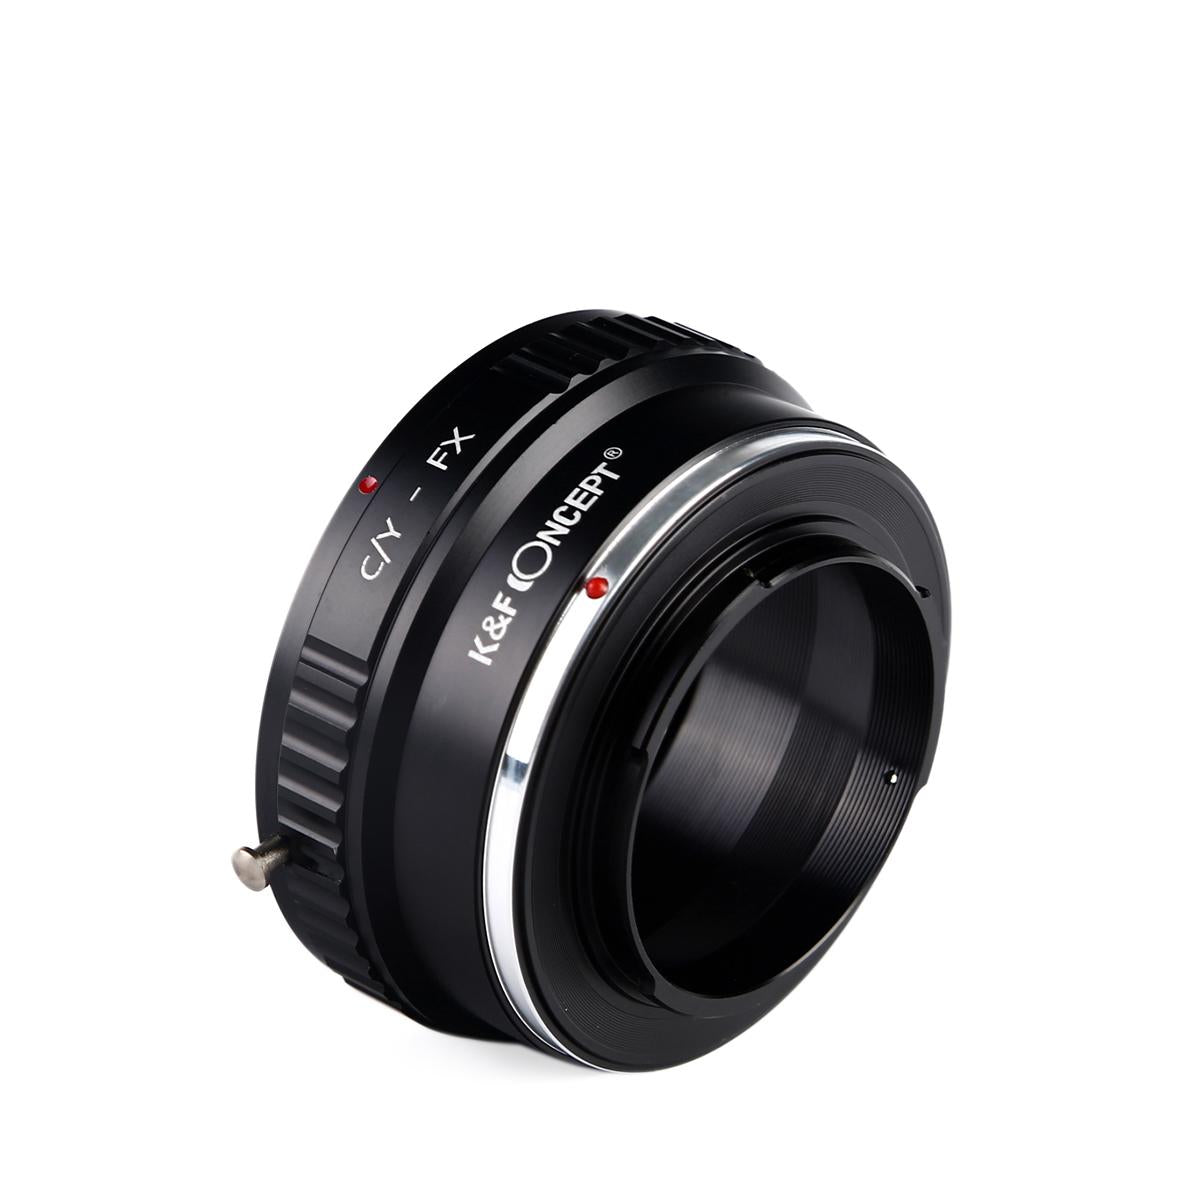 K&F Concept Contax Yashica Lenses to Fuji X Lens Mount Adapter K&F Concept Lens Adapter KF06.105